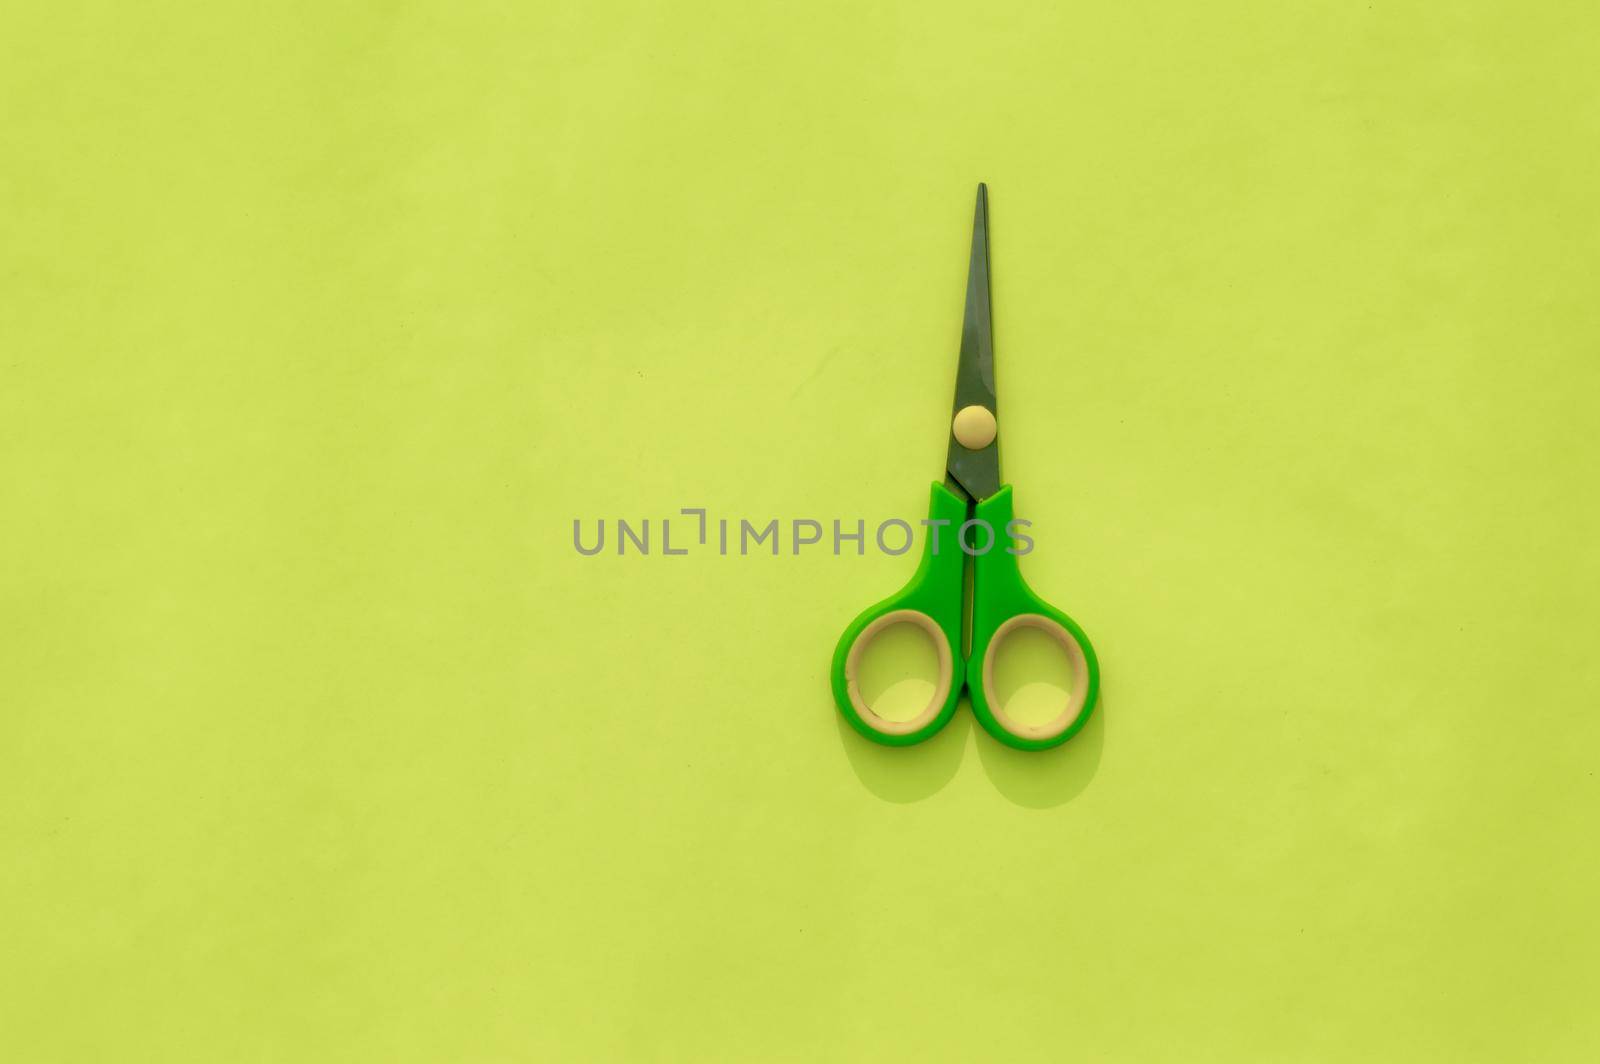 Green scissors isolated on Light green background. Table top view. Copy space for text.